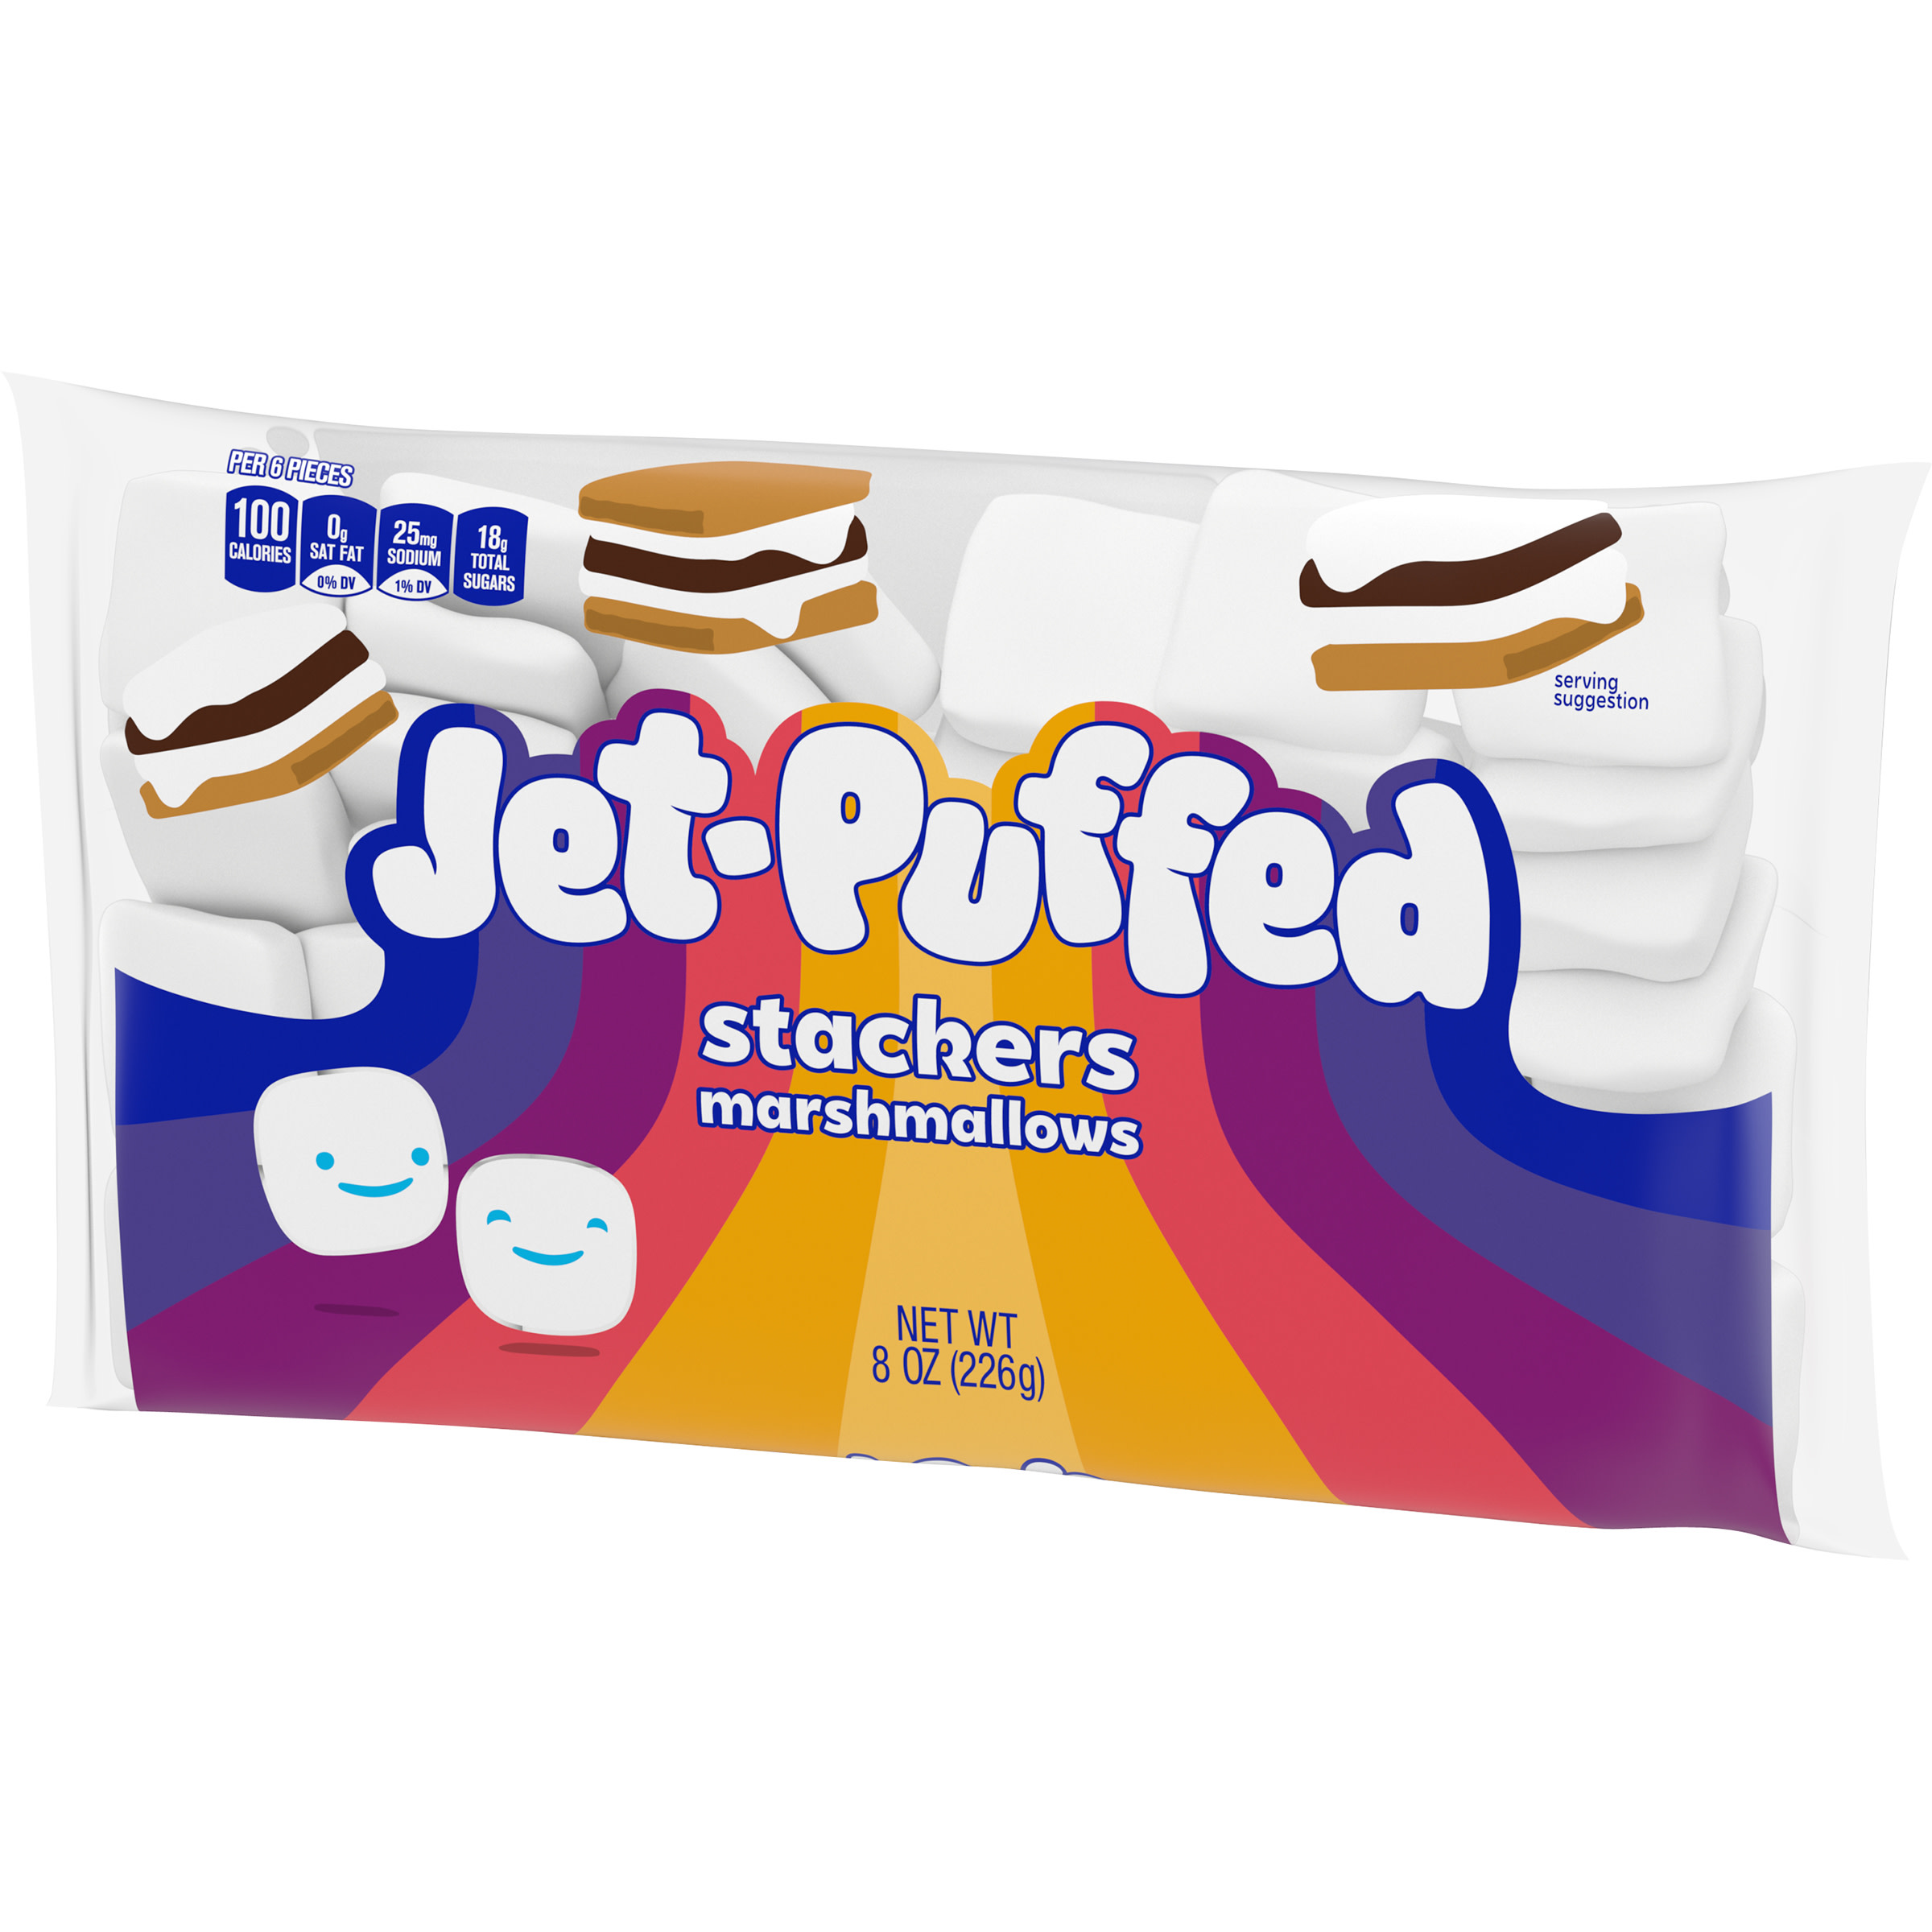 Jet-Puffed Stackers Marshmallows, 8 oz. Bag - image 12 of 16